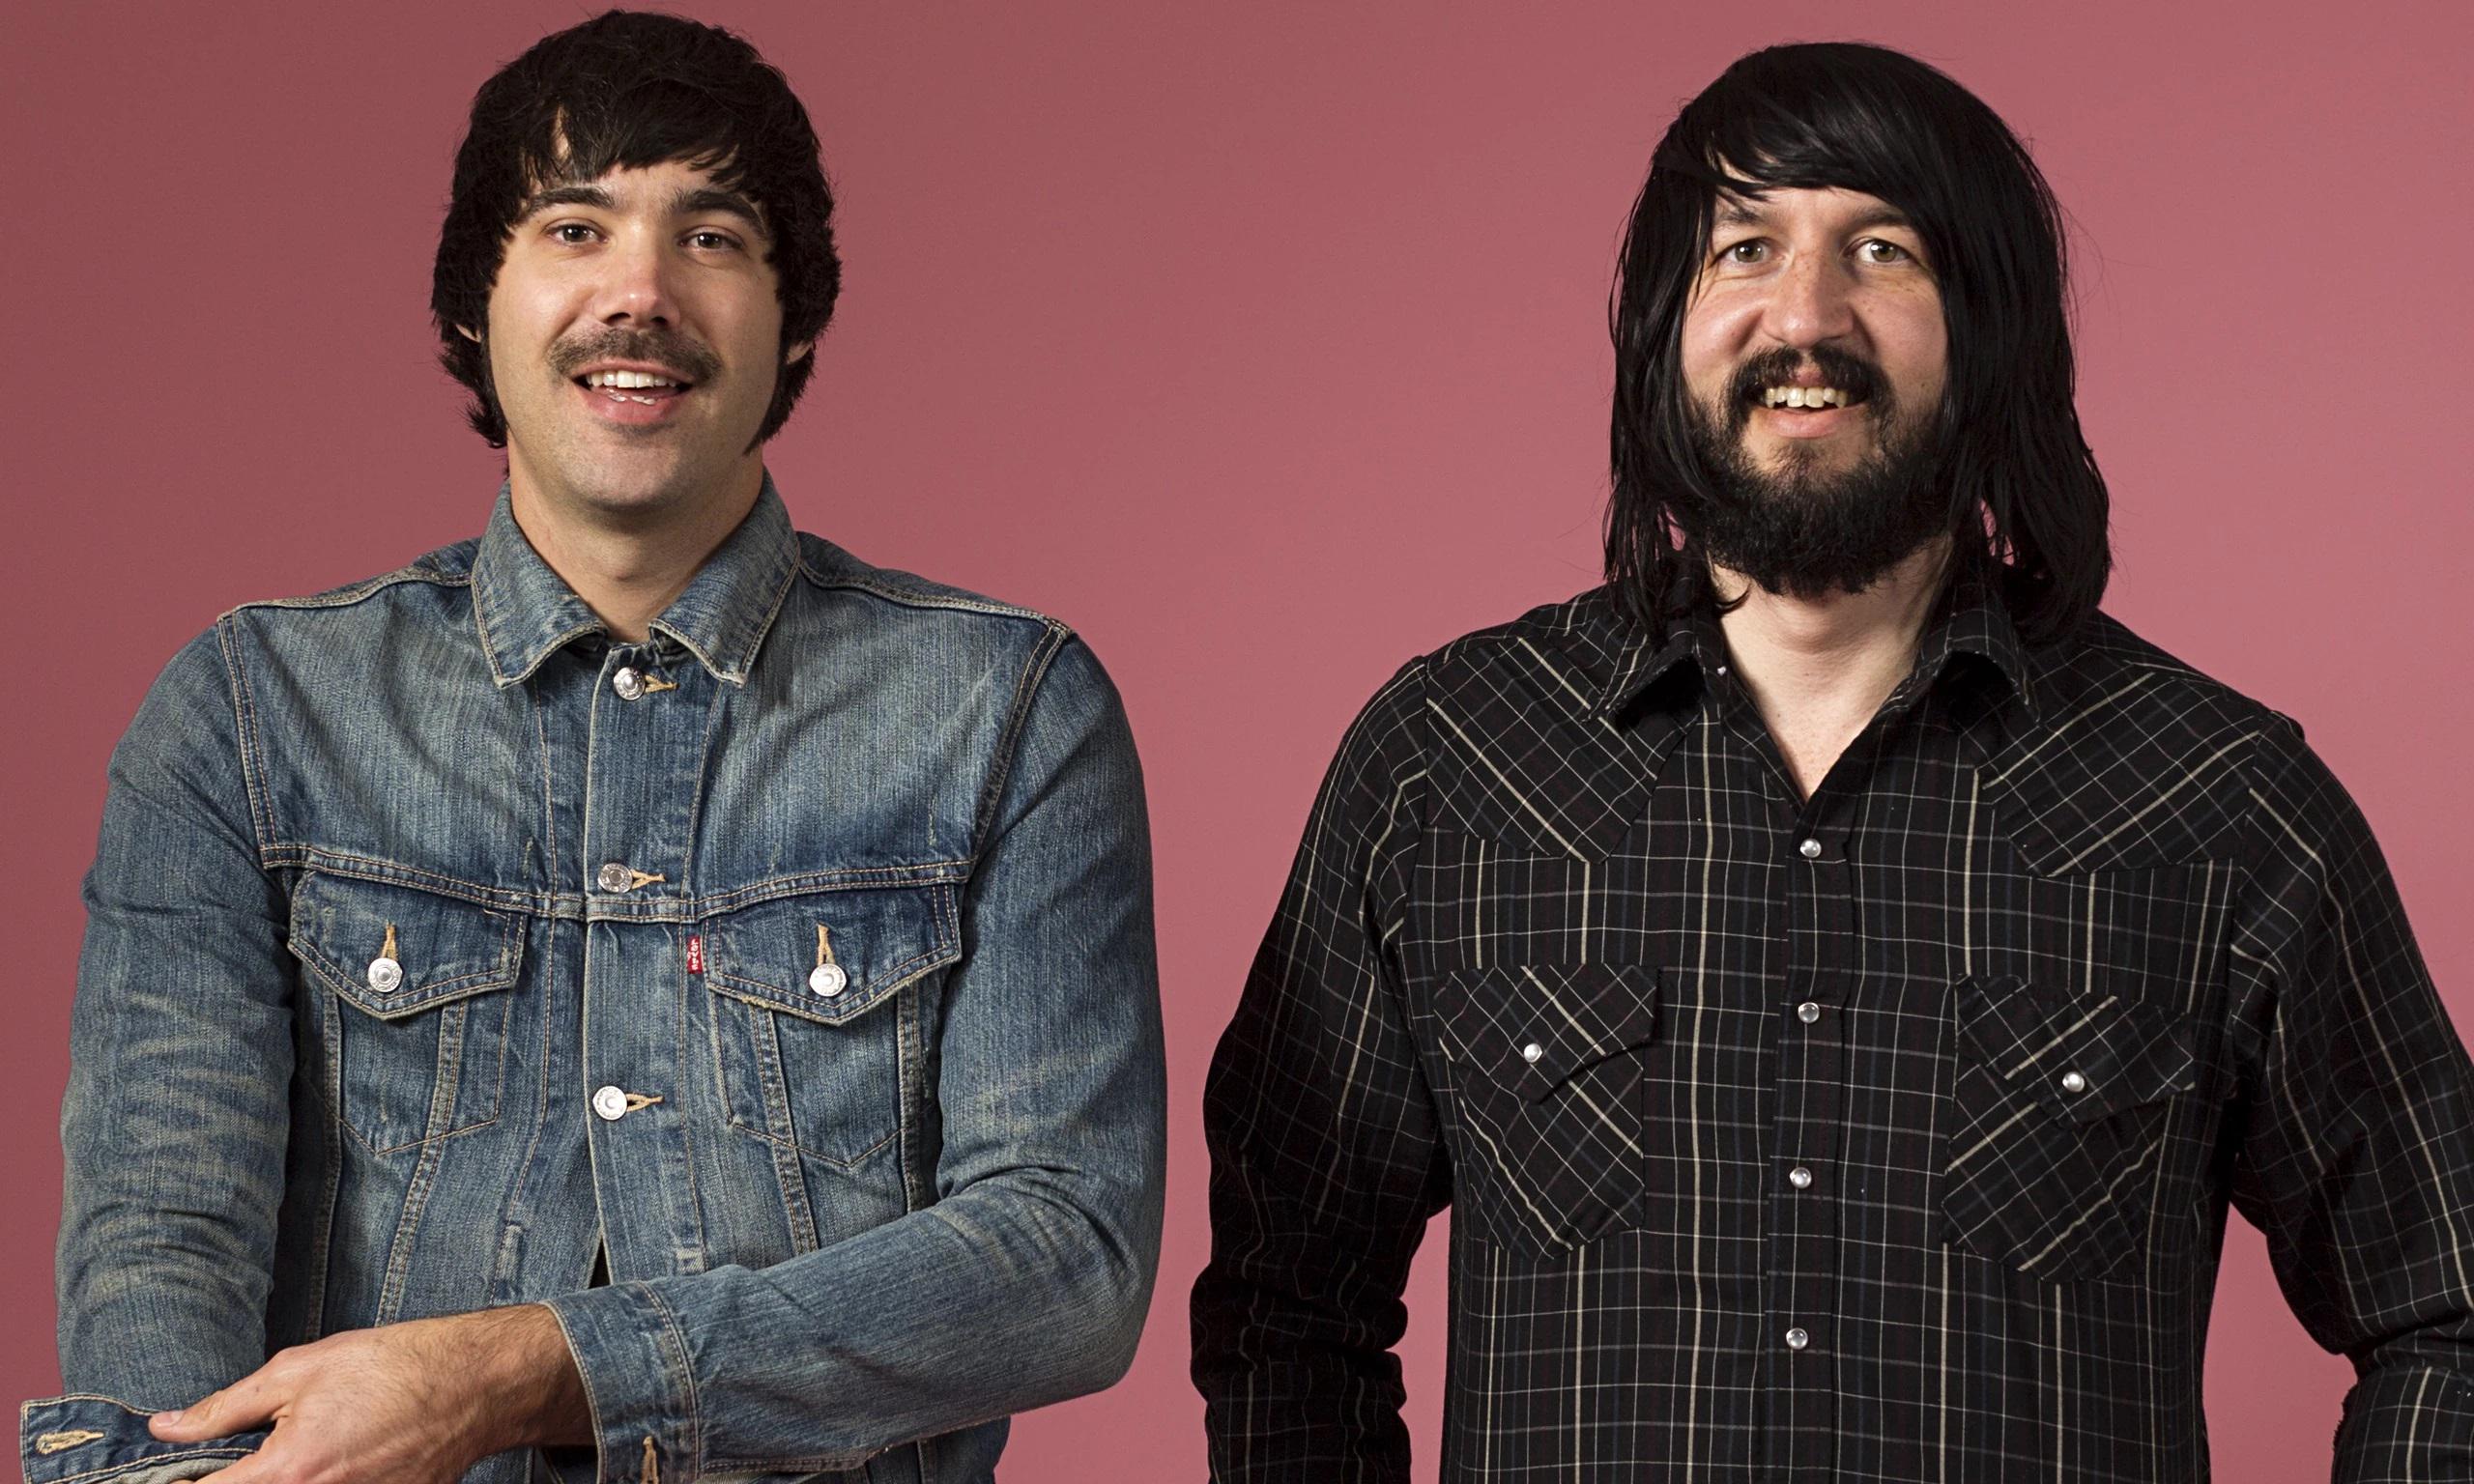 Death From Above 1979 at Underground Arts